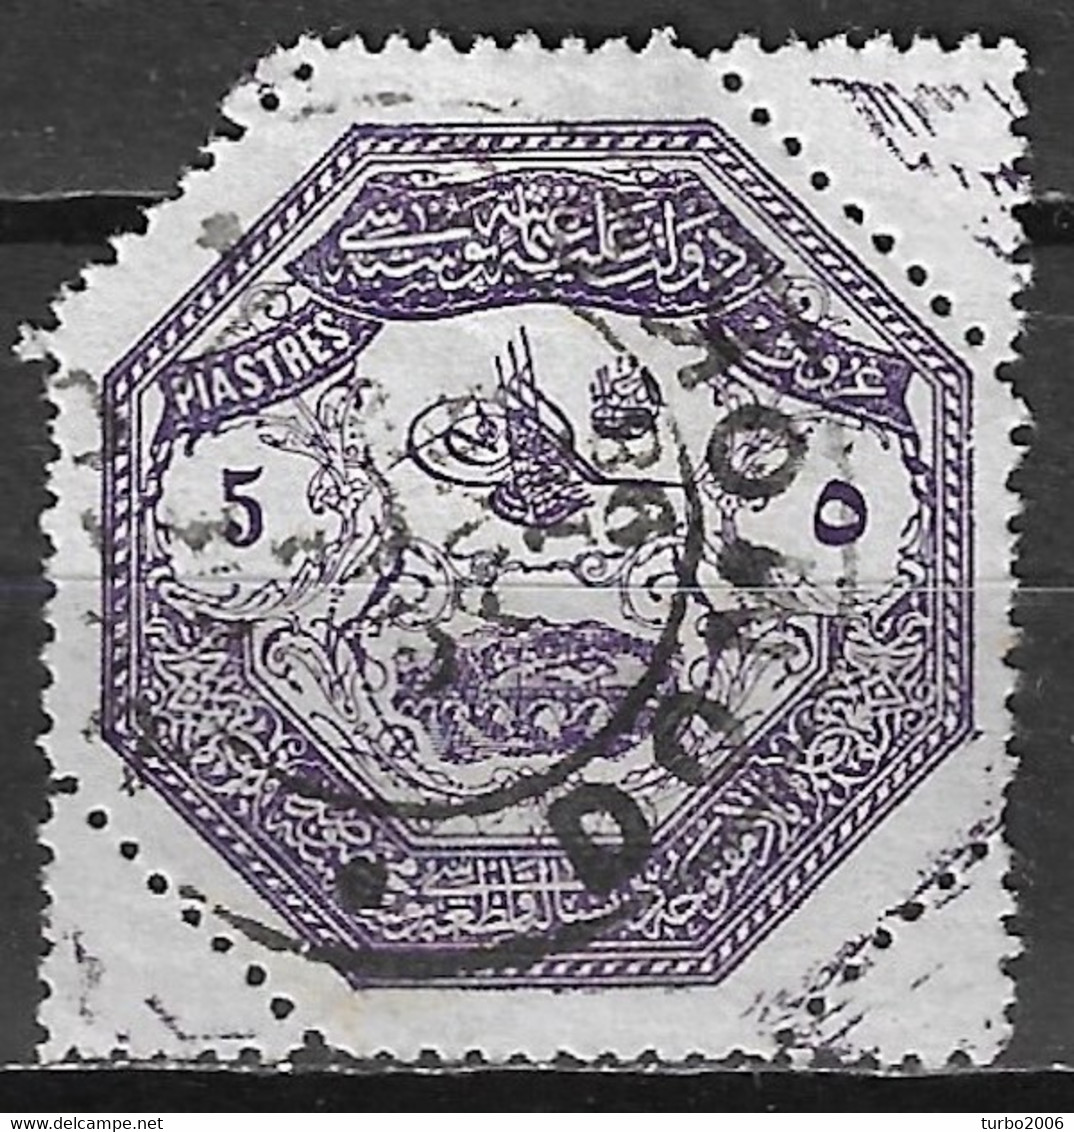 THESSALIA  1898 5 Pi Cancellation DOMOKOS By The Turkish Army Of Occupation During The Greek-Turkish War Of 1897 Vl. 5 - Thesalia